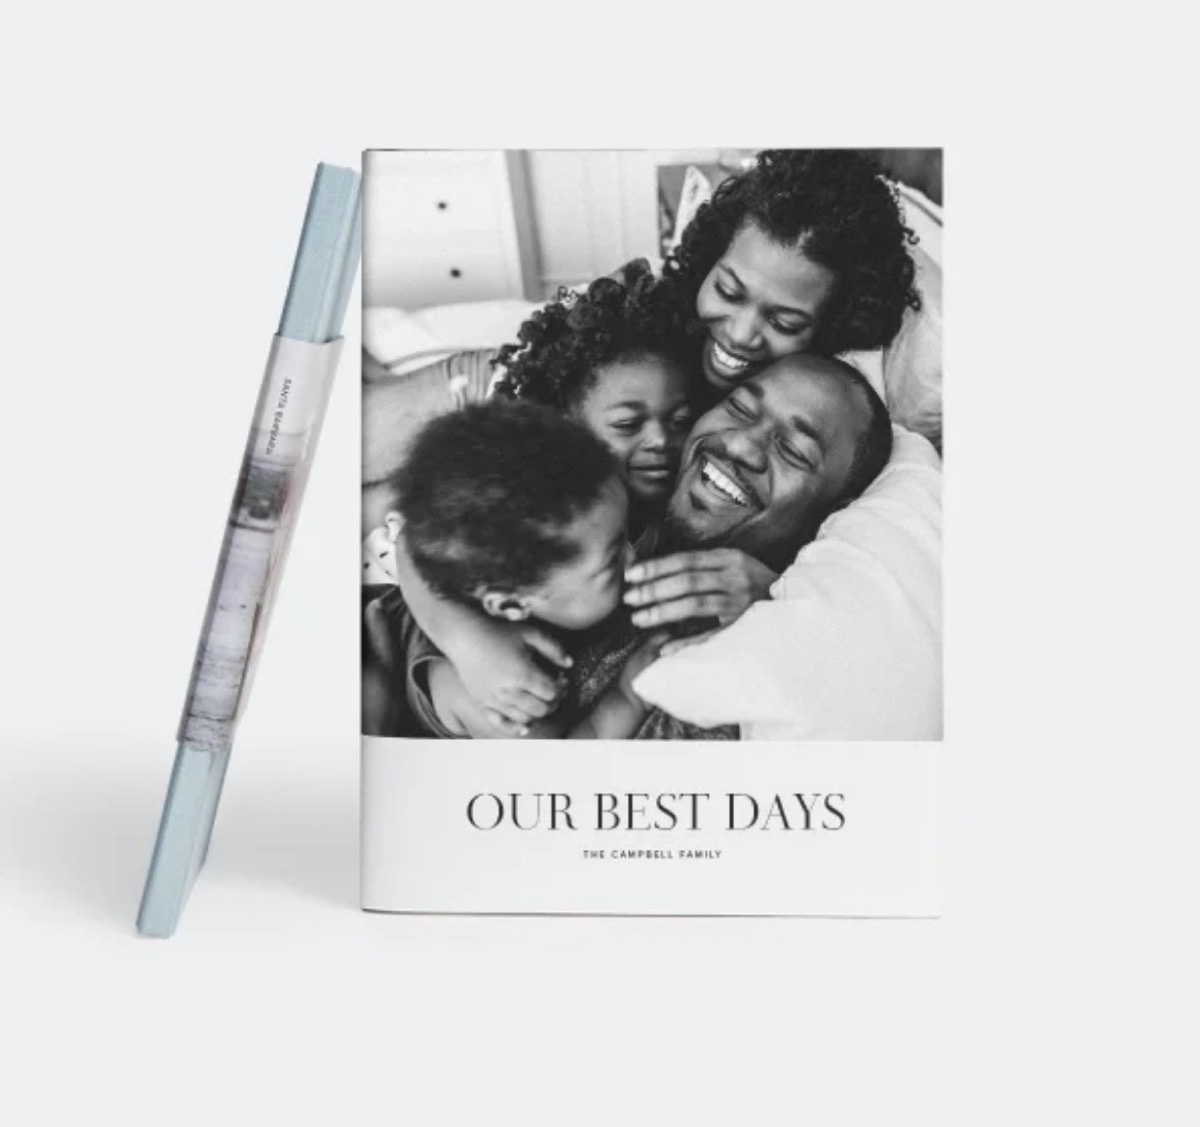 photo book with smiling black family in black and white photo on cover